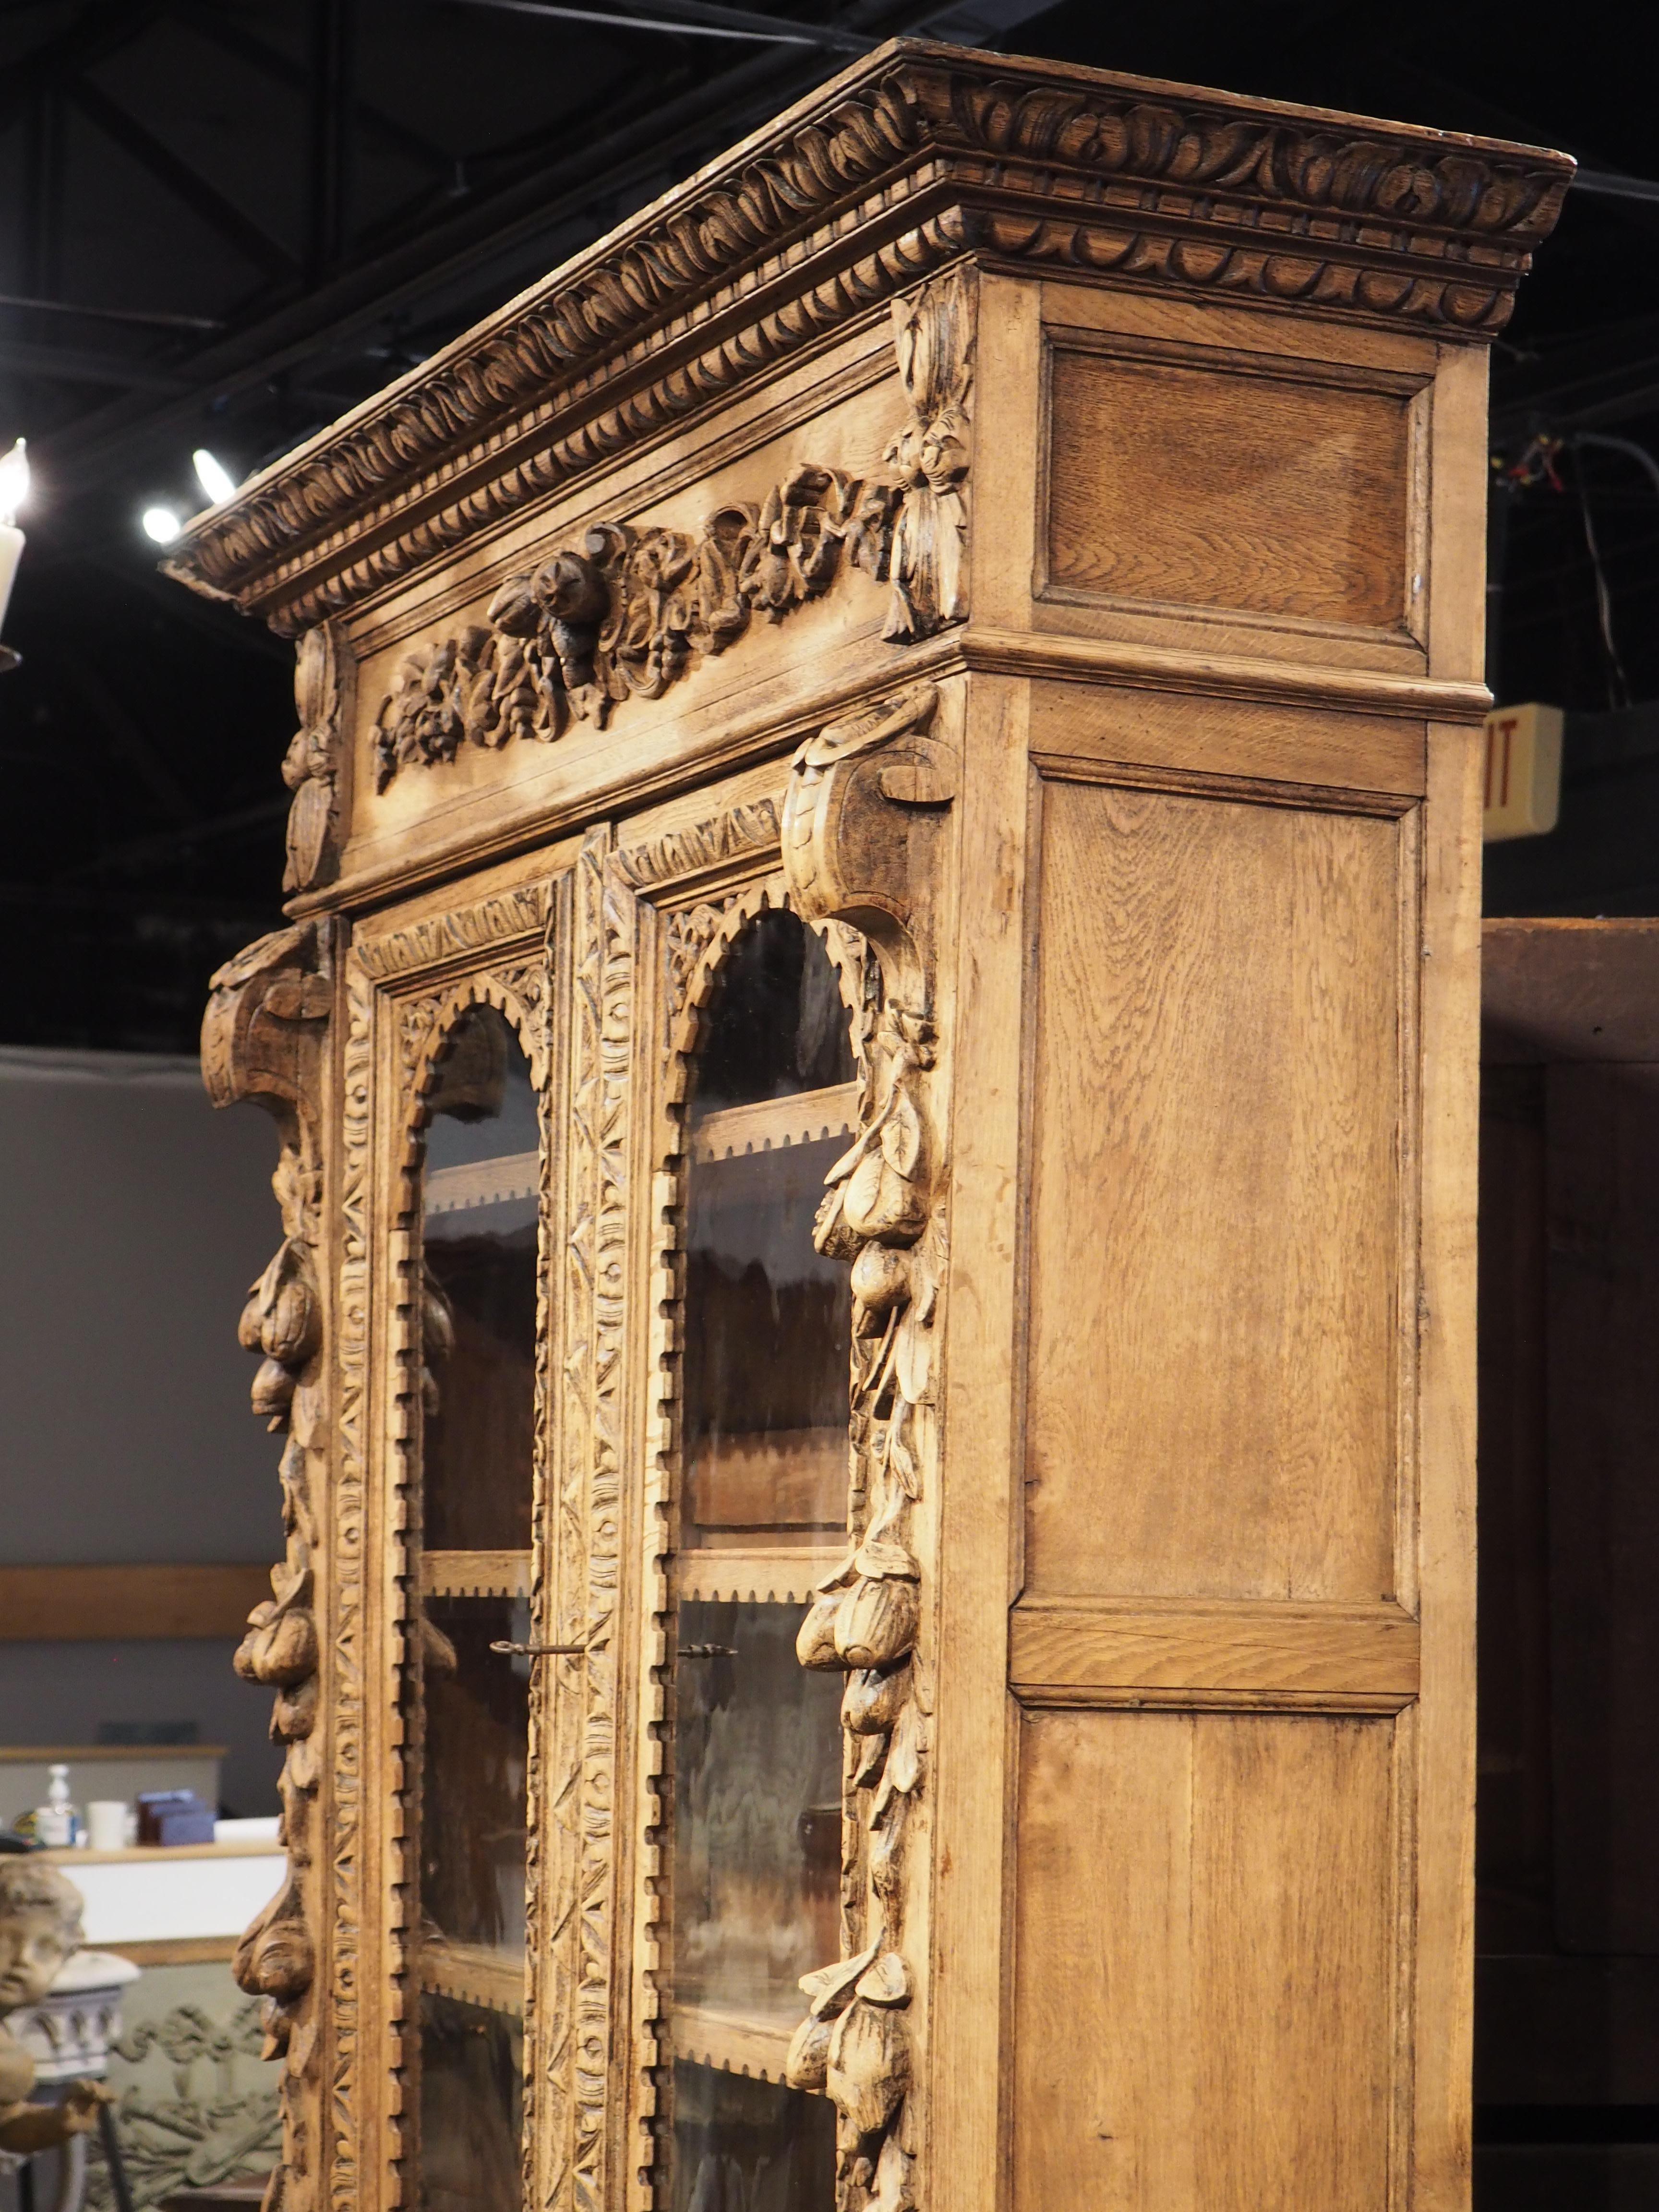 Featuring two hunt trophies and detailed motifs inspired by nature, this oak buffet deux corps was hand-carved in France, circa 1870. Traces of the original finish are still visible, but the wood was previously bleached, giving it a warm, golden